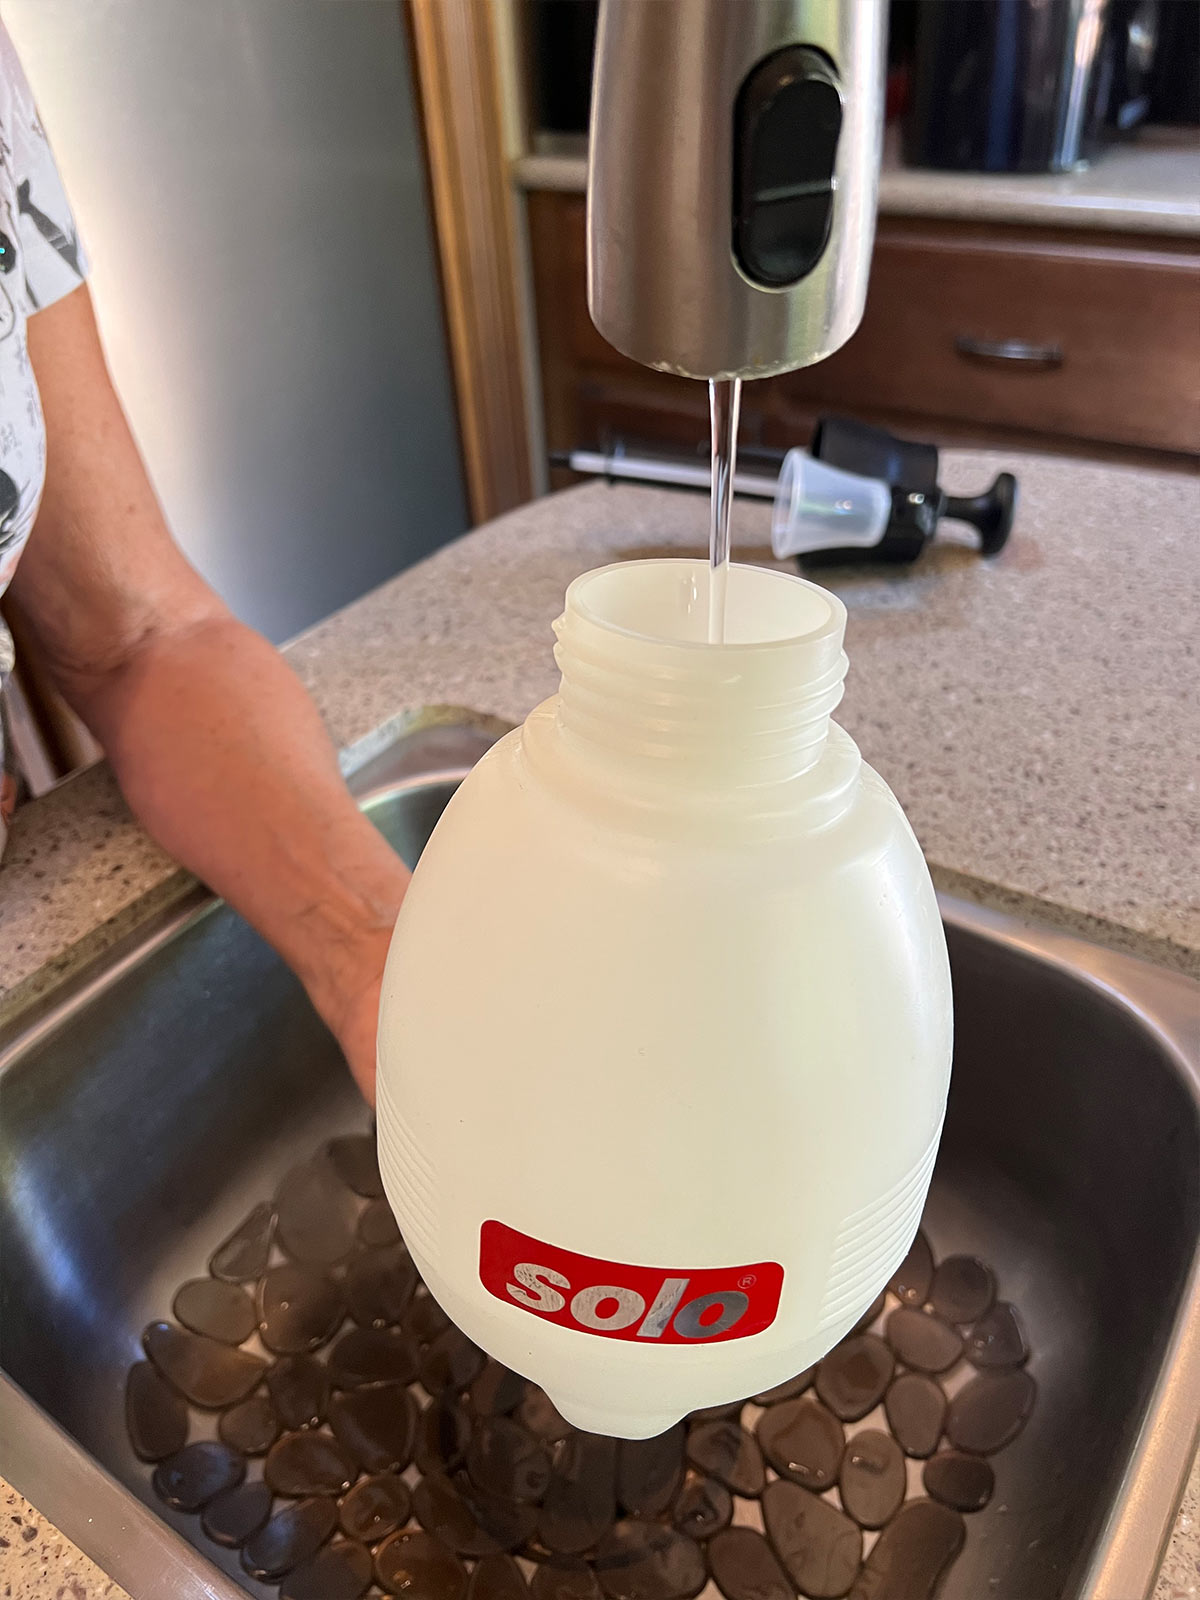 a Solo canister is filled with water from a faucet